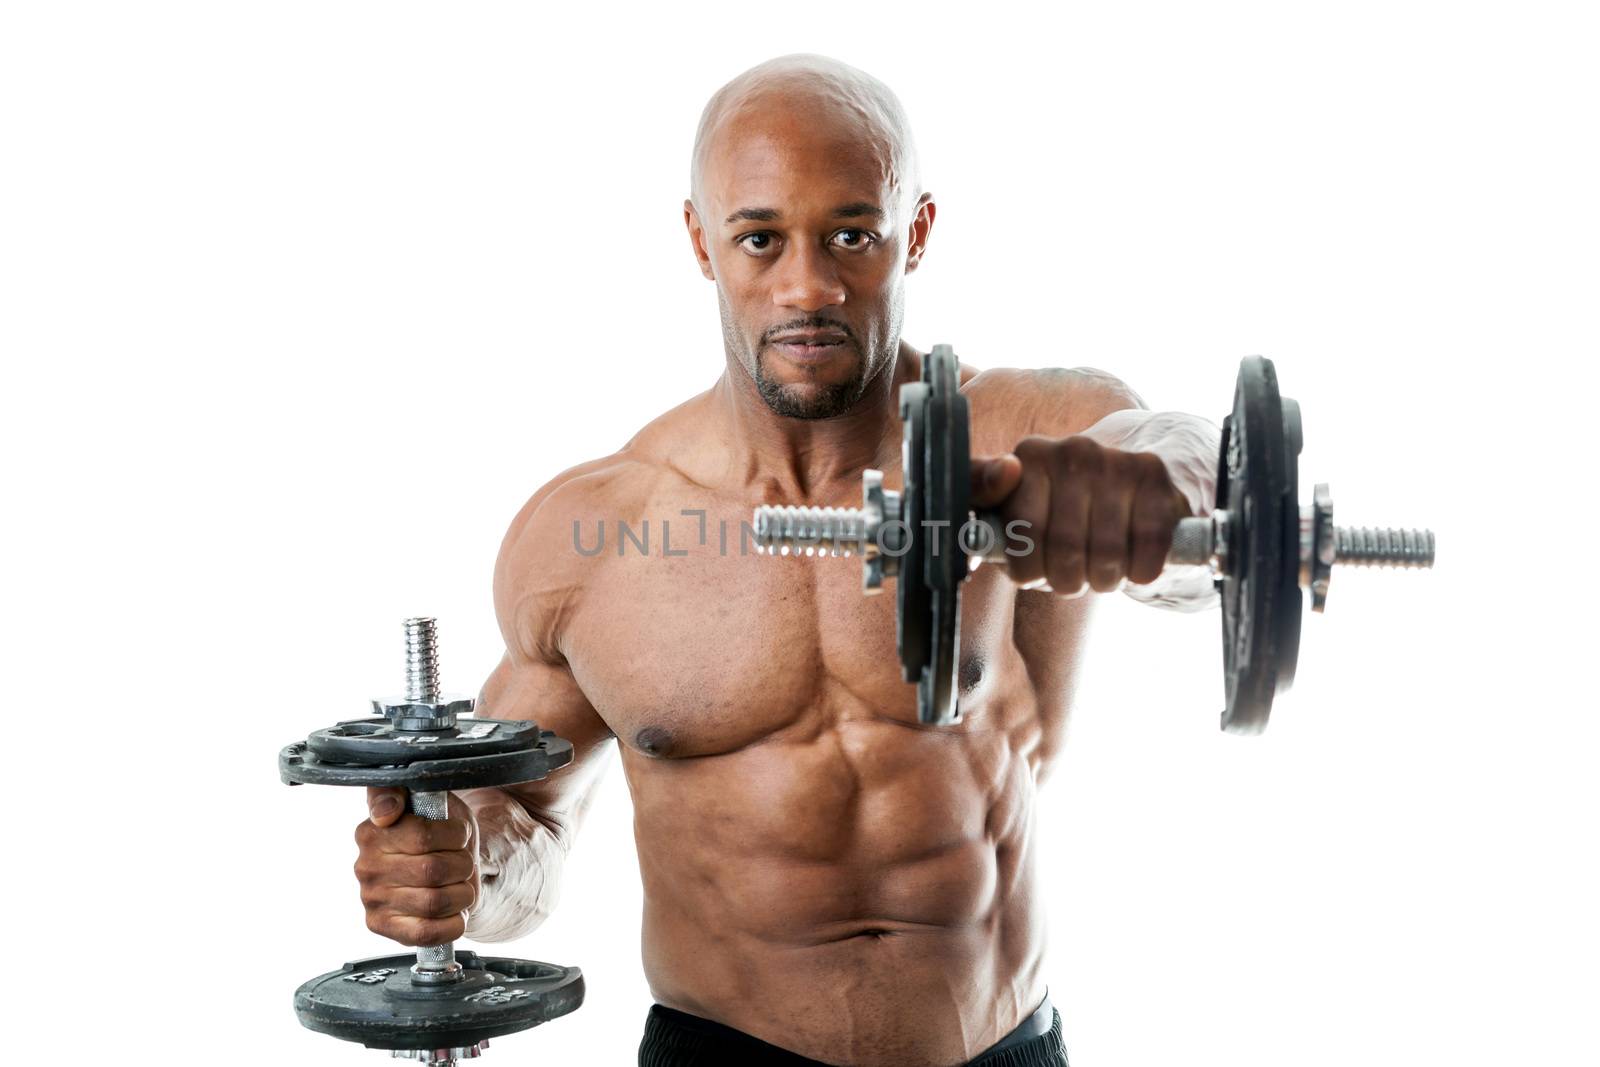 Toned and ripped lean muscle fitness man lifting weights isolated over a white background. Shallow depth of field.